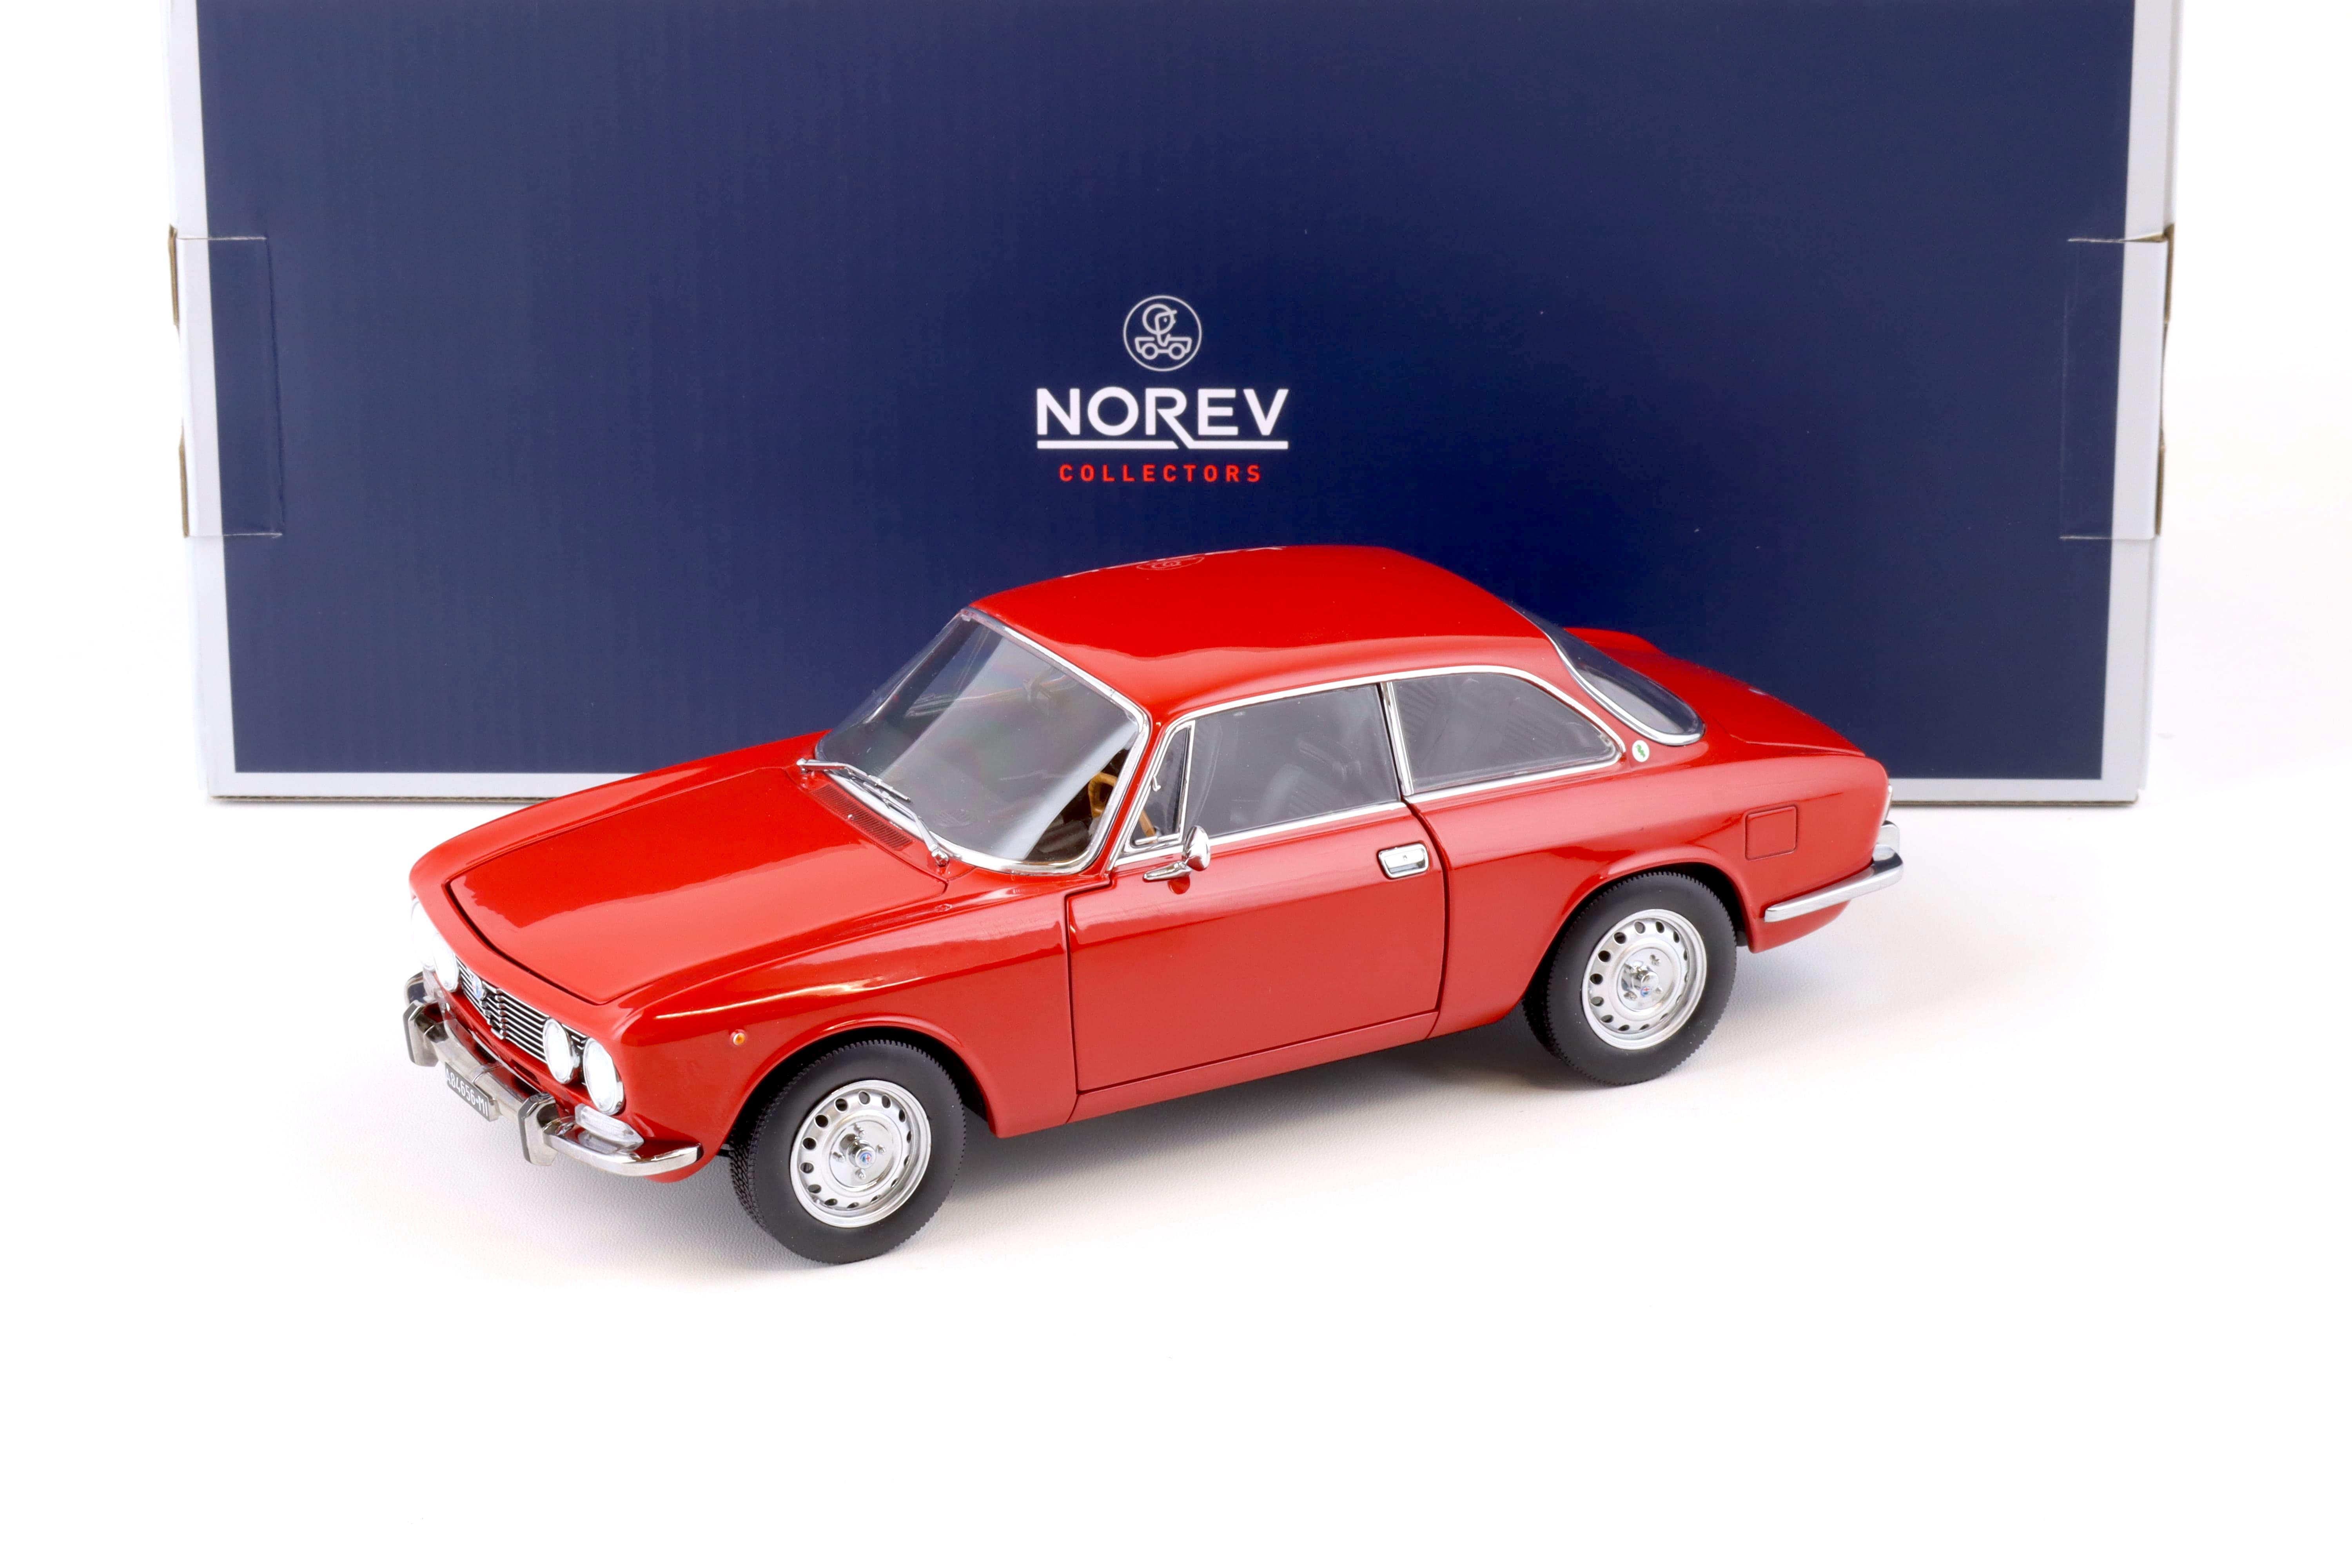 1:18 Norev Alfa Romeo 2000 GTV Coupe 1973 red Limited 1000 pcs.